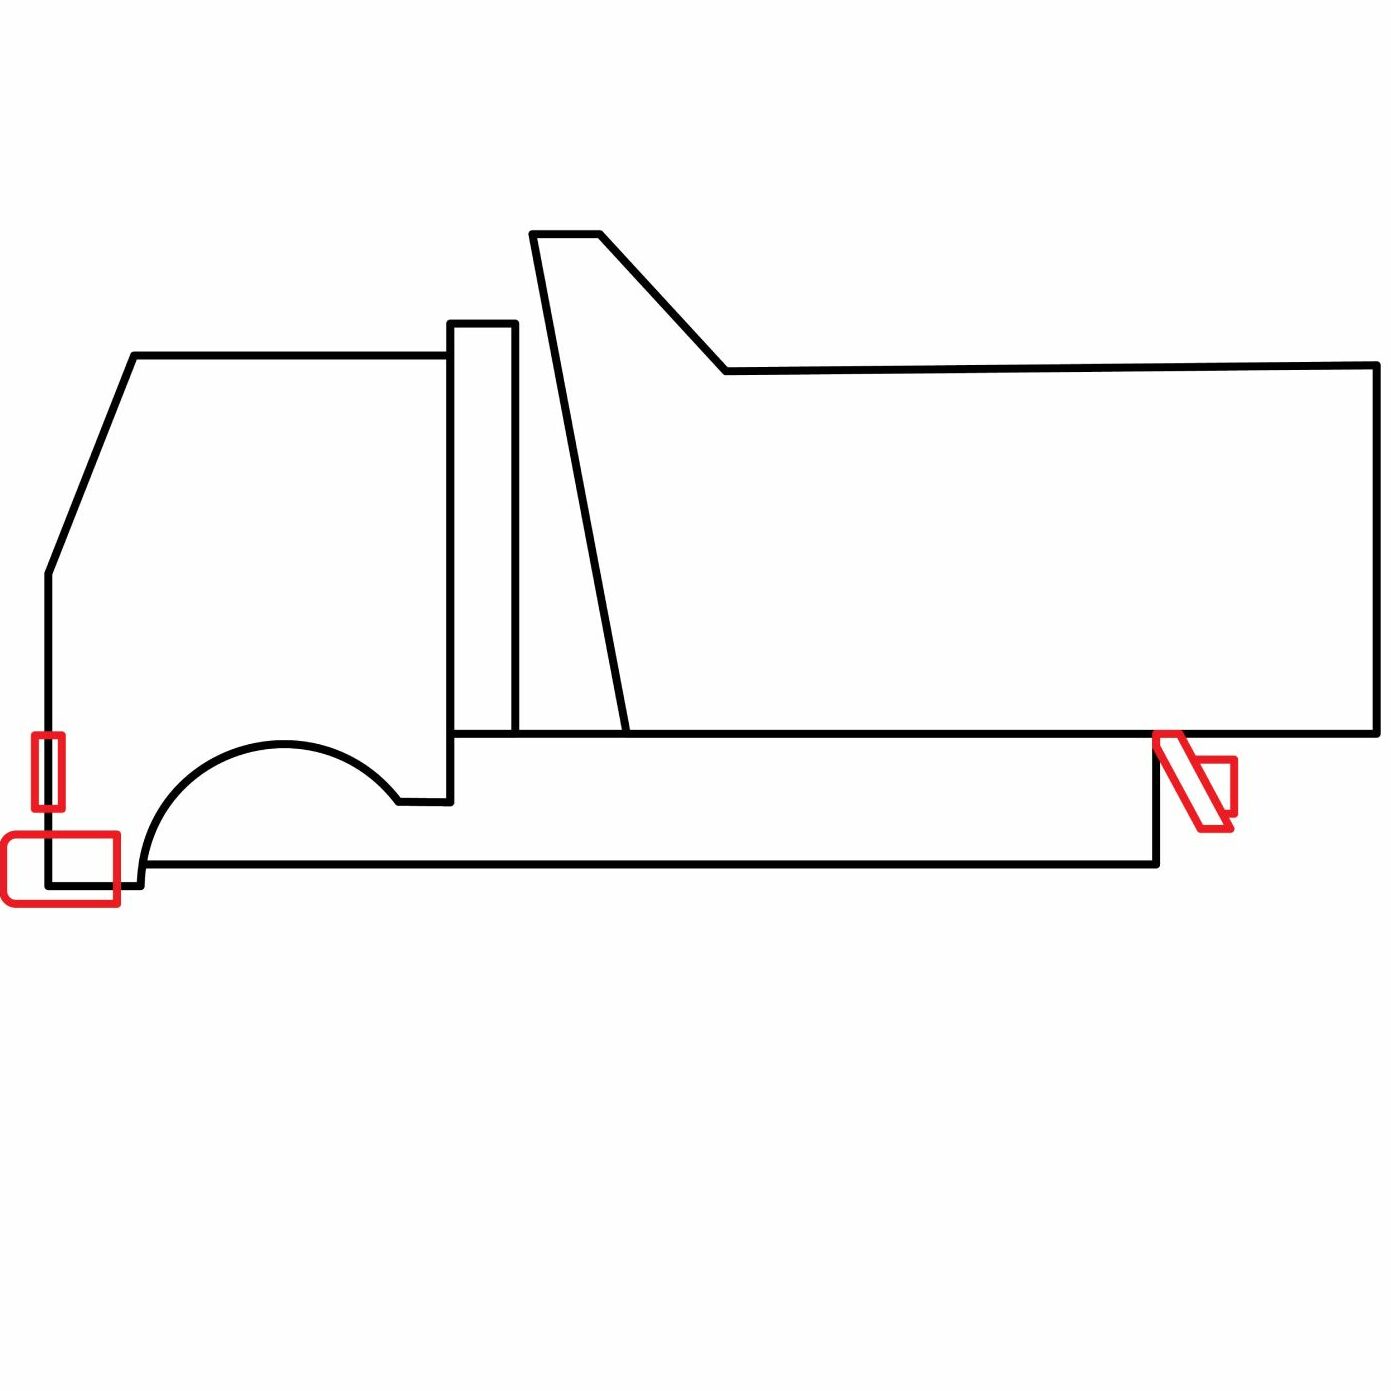 how to draw a dump truck